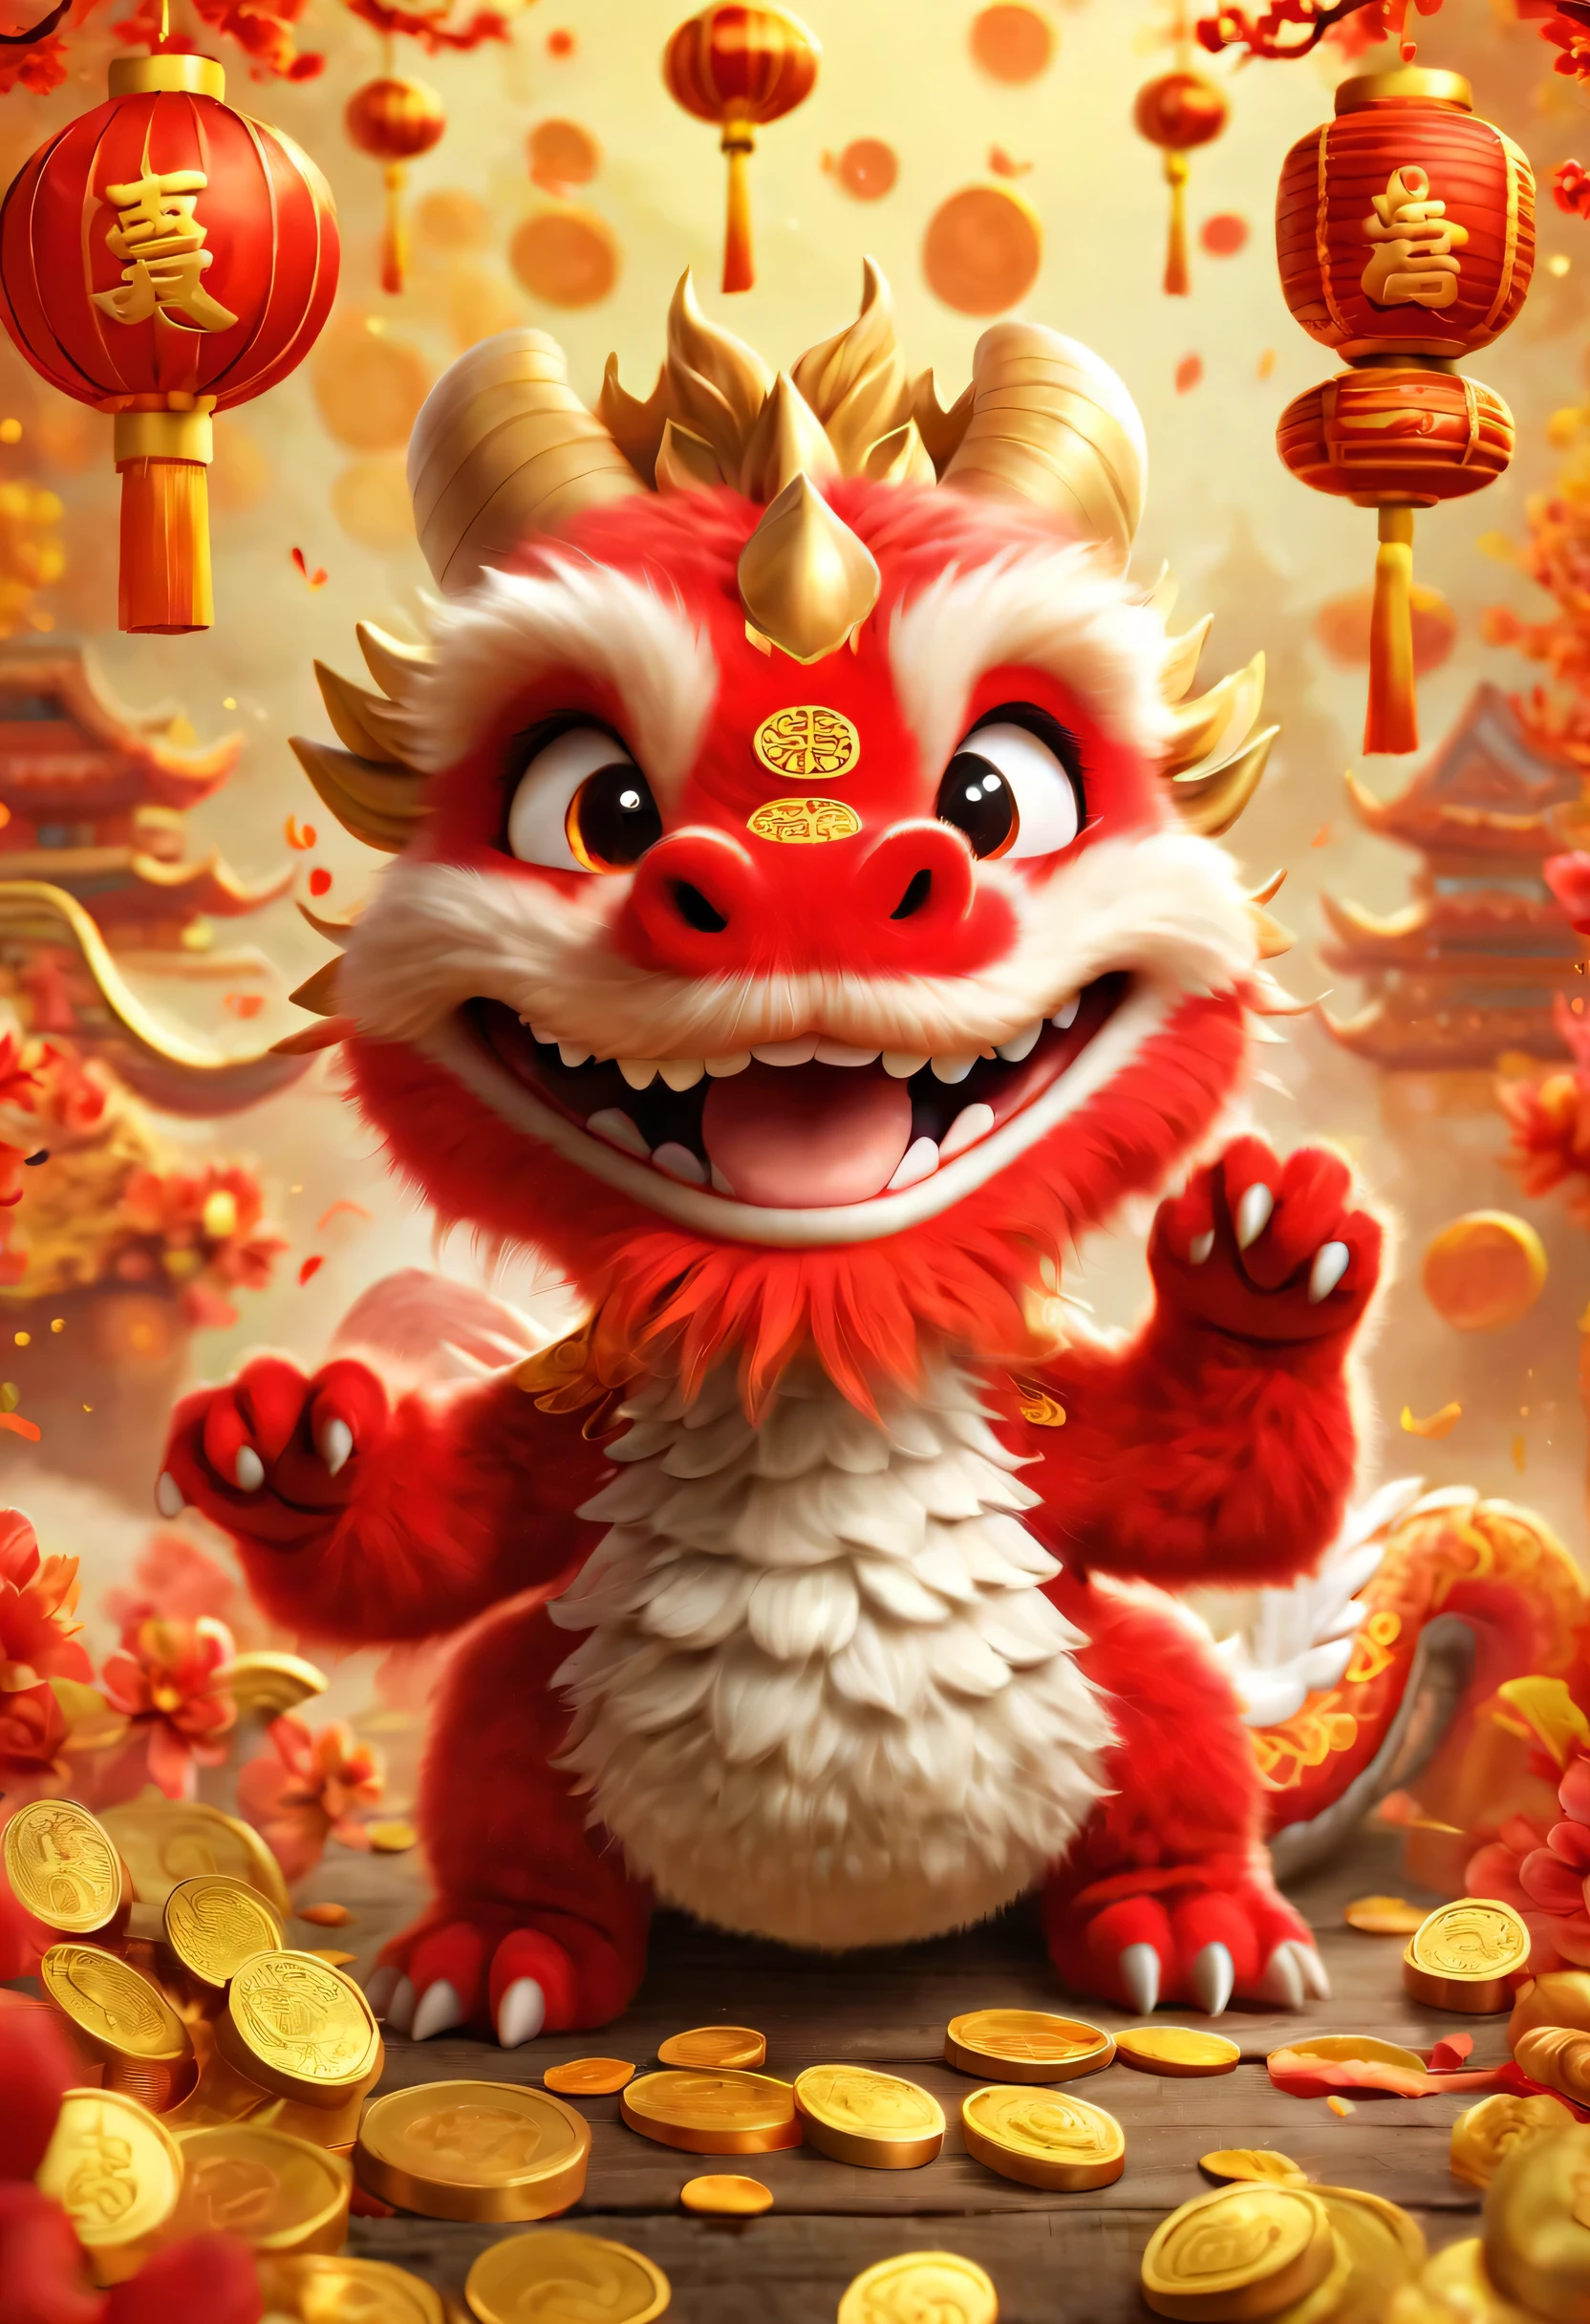 poster design：Chinese New Year is here，Cute little Chinese dragon so happy，hairy，purse，There are many gold coins in the air，Chinese element background blur，